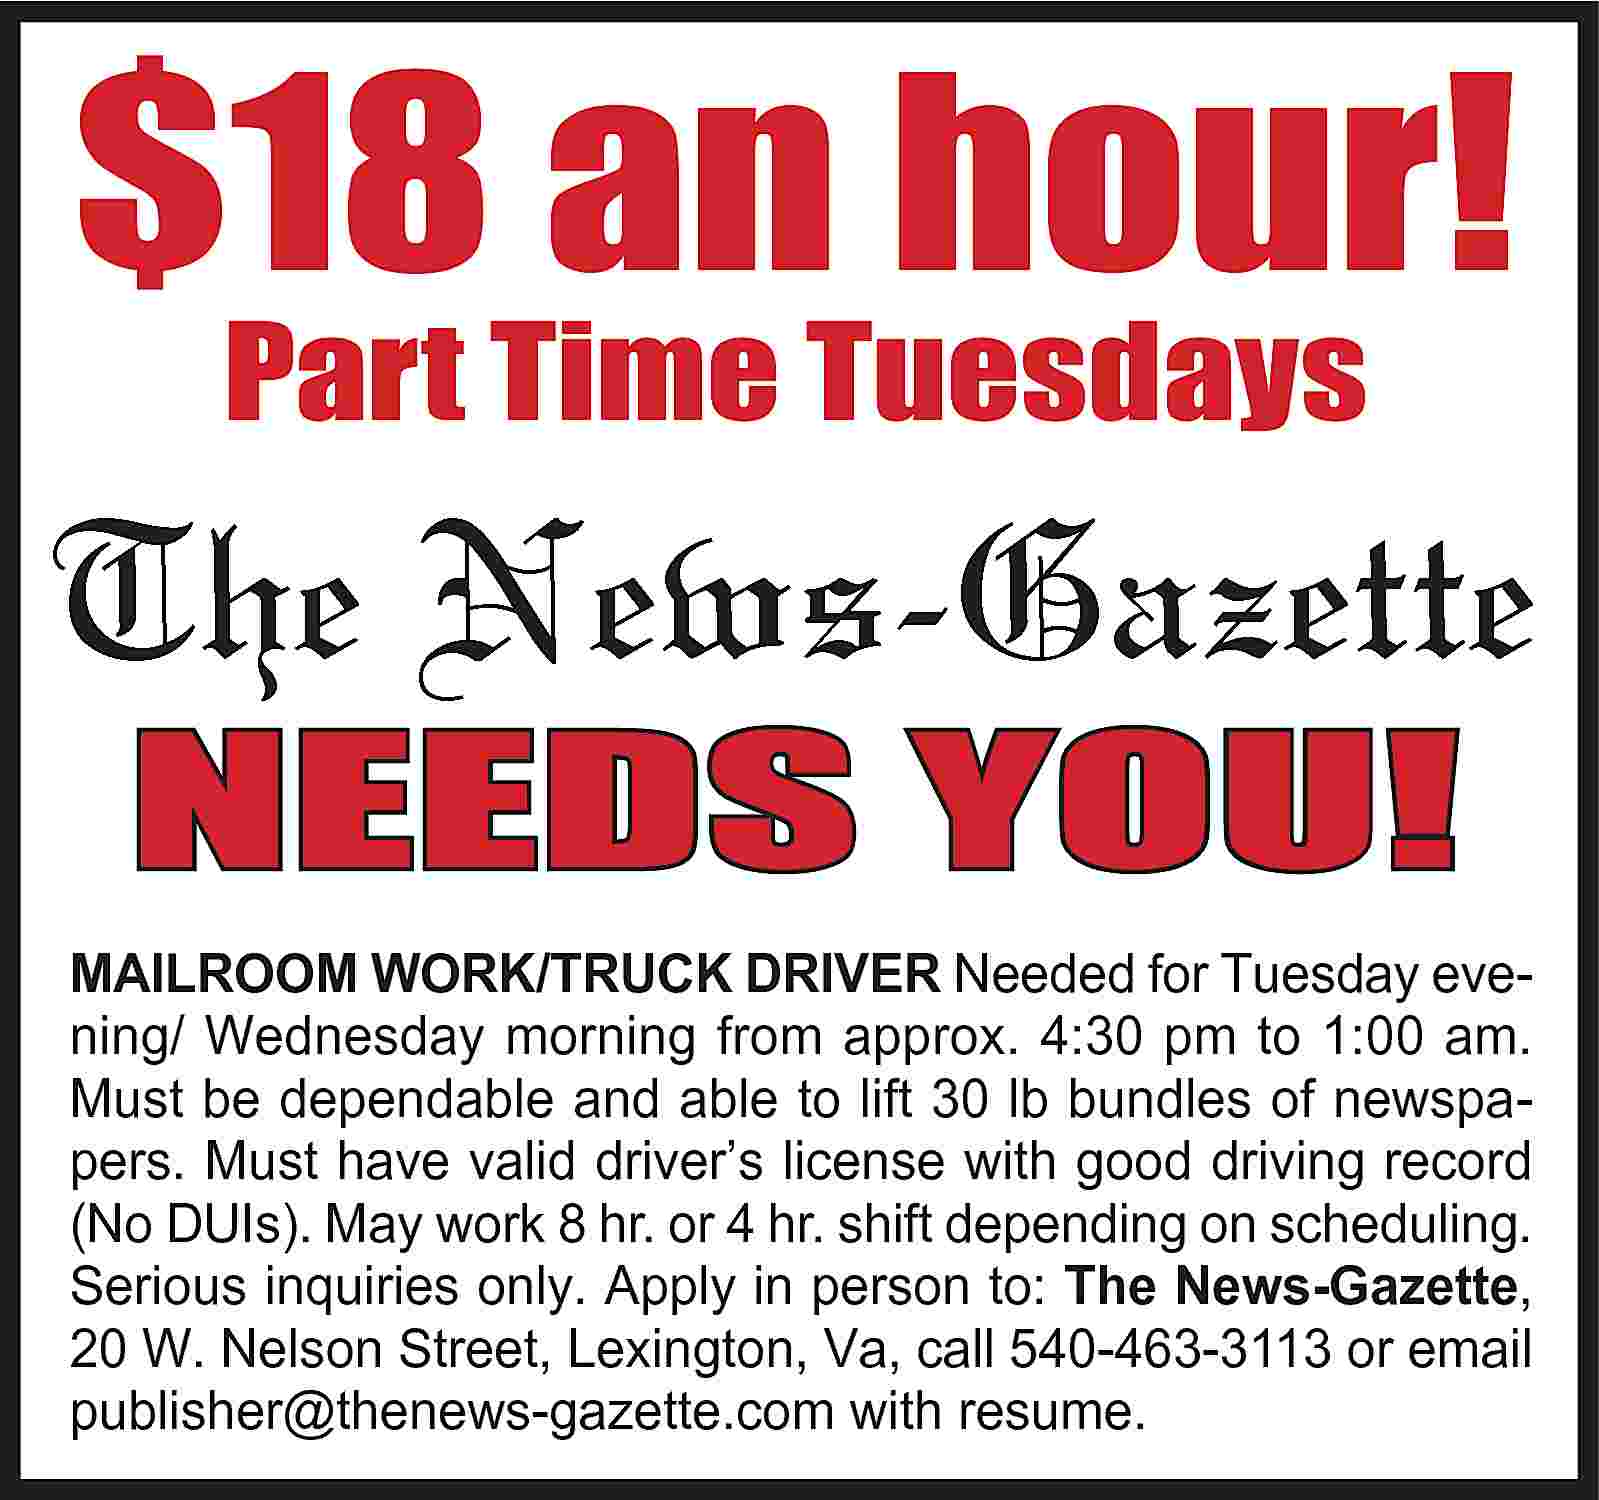 $18 an hour! Part Time  $18 an hour! Part Time Tuesdays The News-Gazette NEEDS YOU! MAILROOM WORK/TRUCK DRIVER Needed for Tuesday evening/ Wednesday morning from approx. 4:30 pm to 1:00 am. Must be dependable and able to lift 30 lb bundles of newspapers. Must have valid driver’s license with good driving record (No DUIs). May work 8 hr. or 4 hr. shift depending on scheduling. Serious inquiries only. Apply in person to: The News-Gazette, 20 W. Nelson Street, Lexington, Va, call 540-463-3113 or email publisher@thenews-gazette.com with resume.